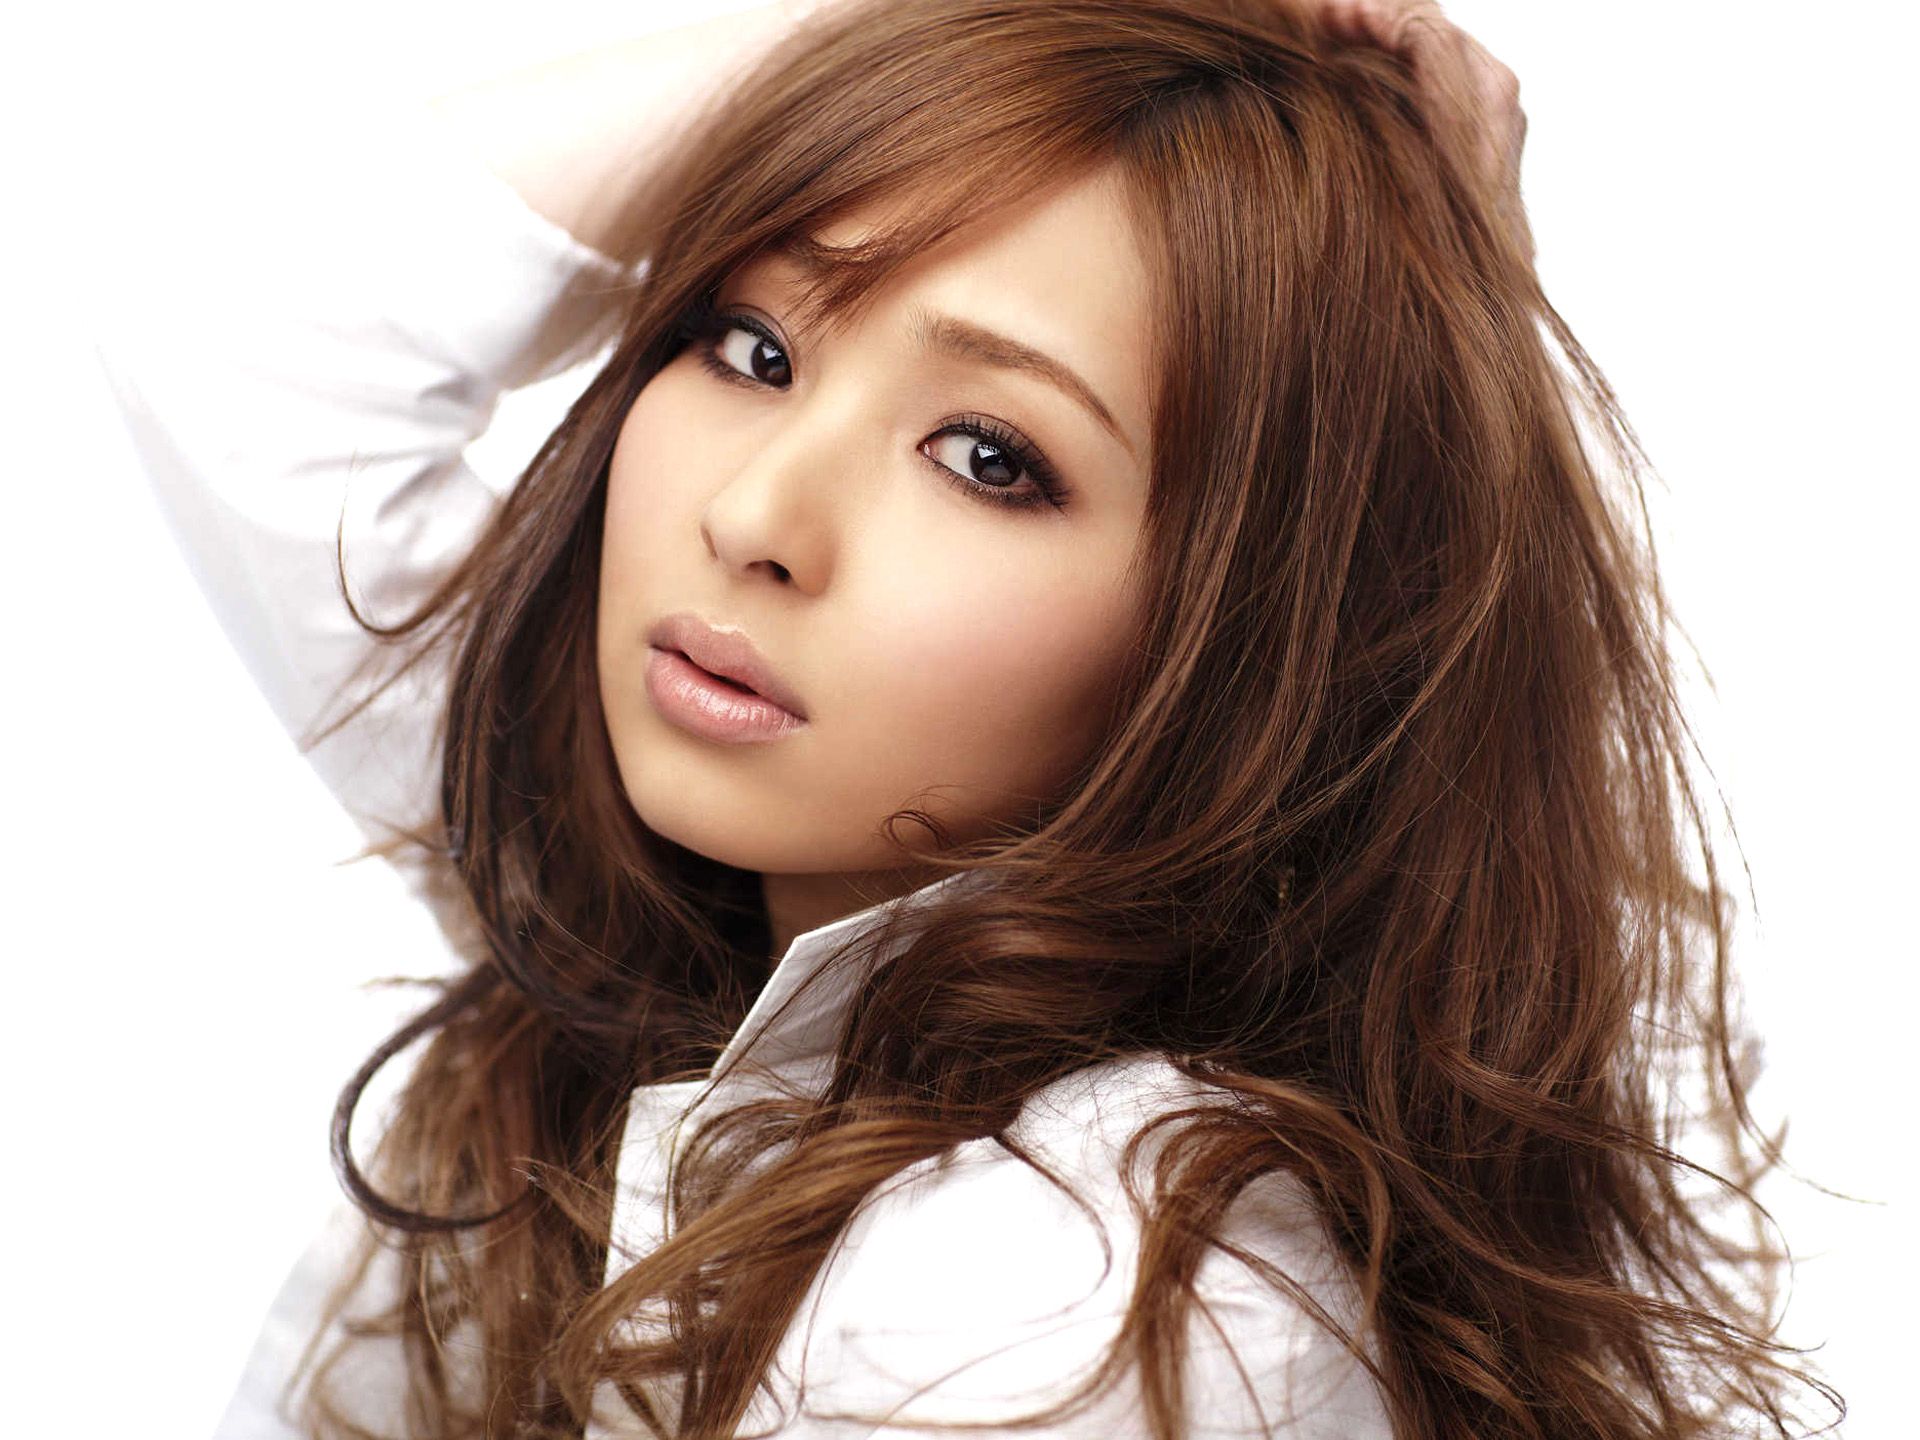 Top 10 Most Beautiful Japanese Women in the World | Hot Actress Japan